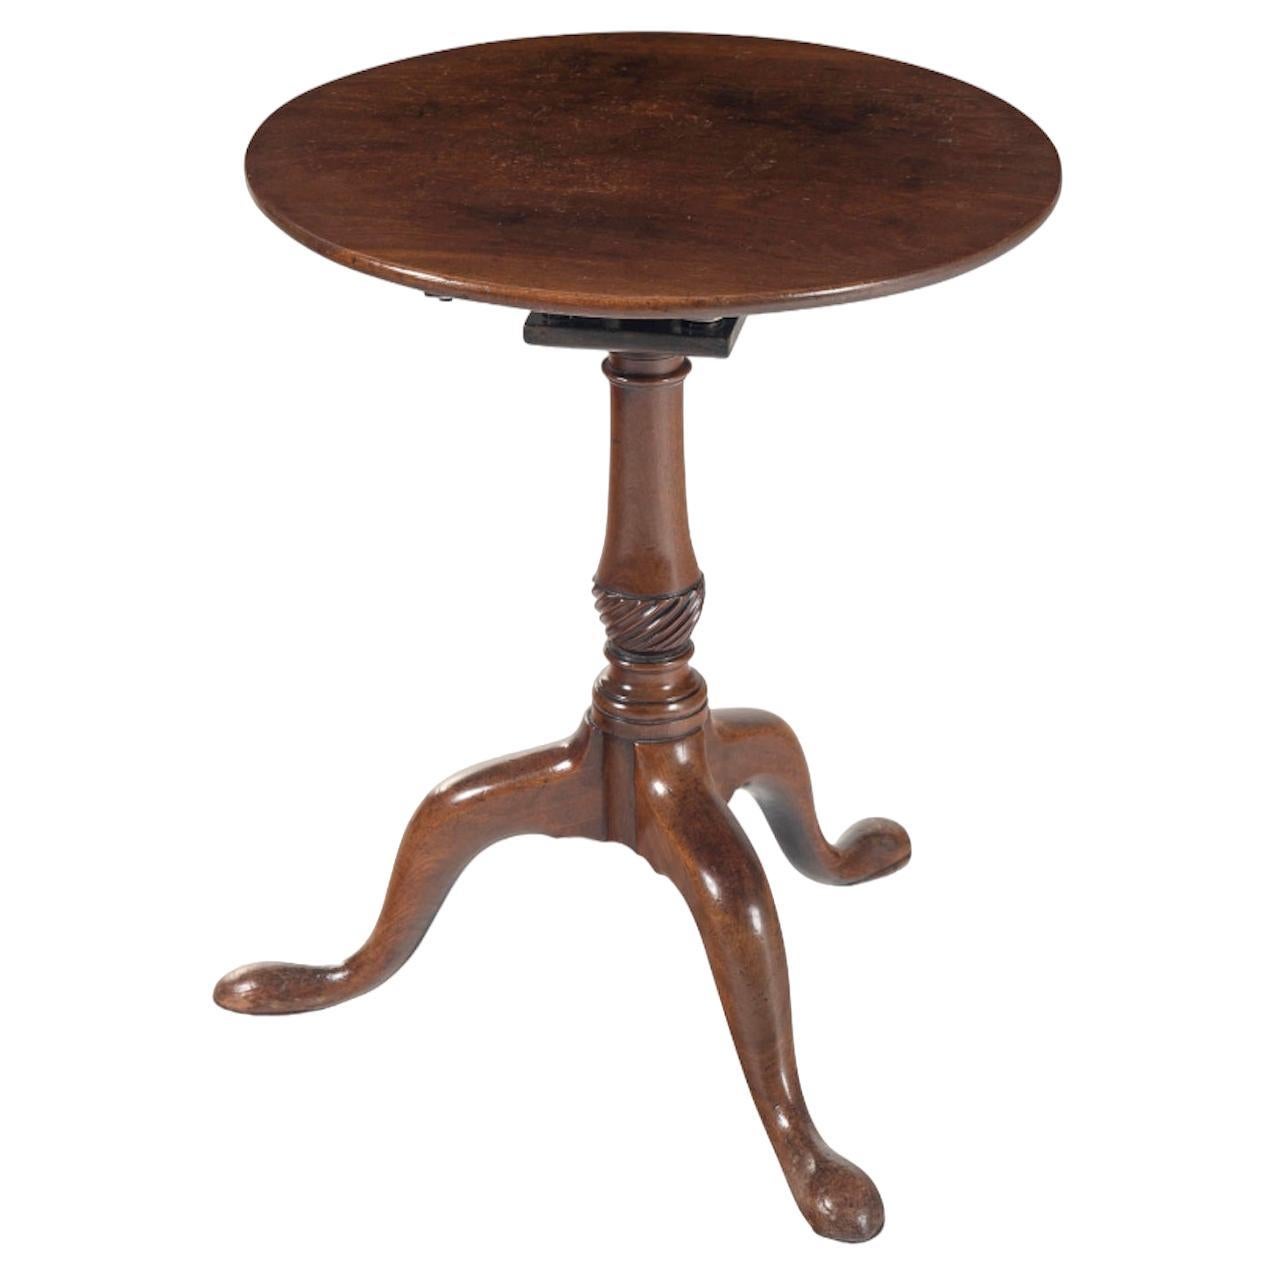 A George III Mahogany Tilt-Top Table 18th Century.  Great color and patination. For Sale